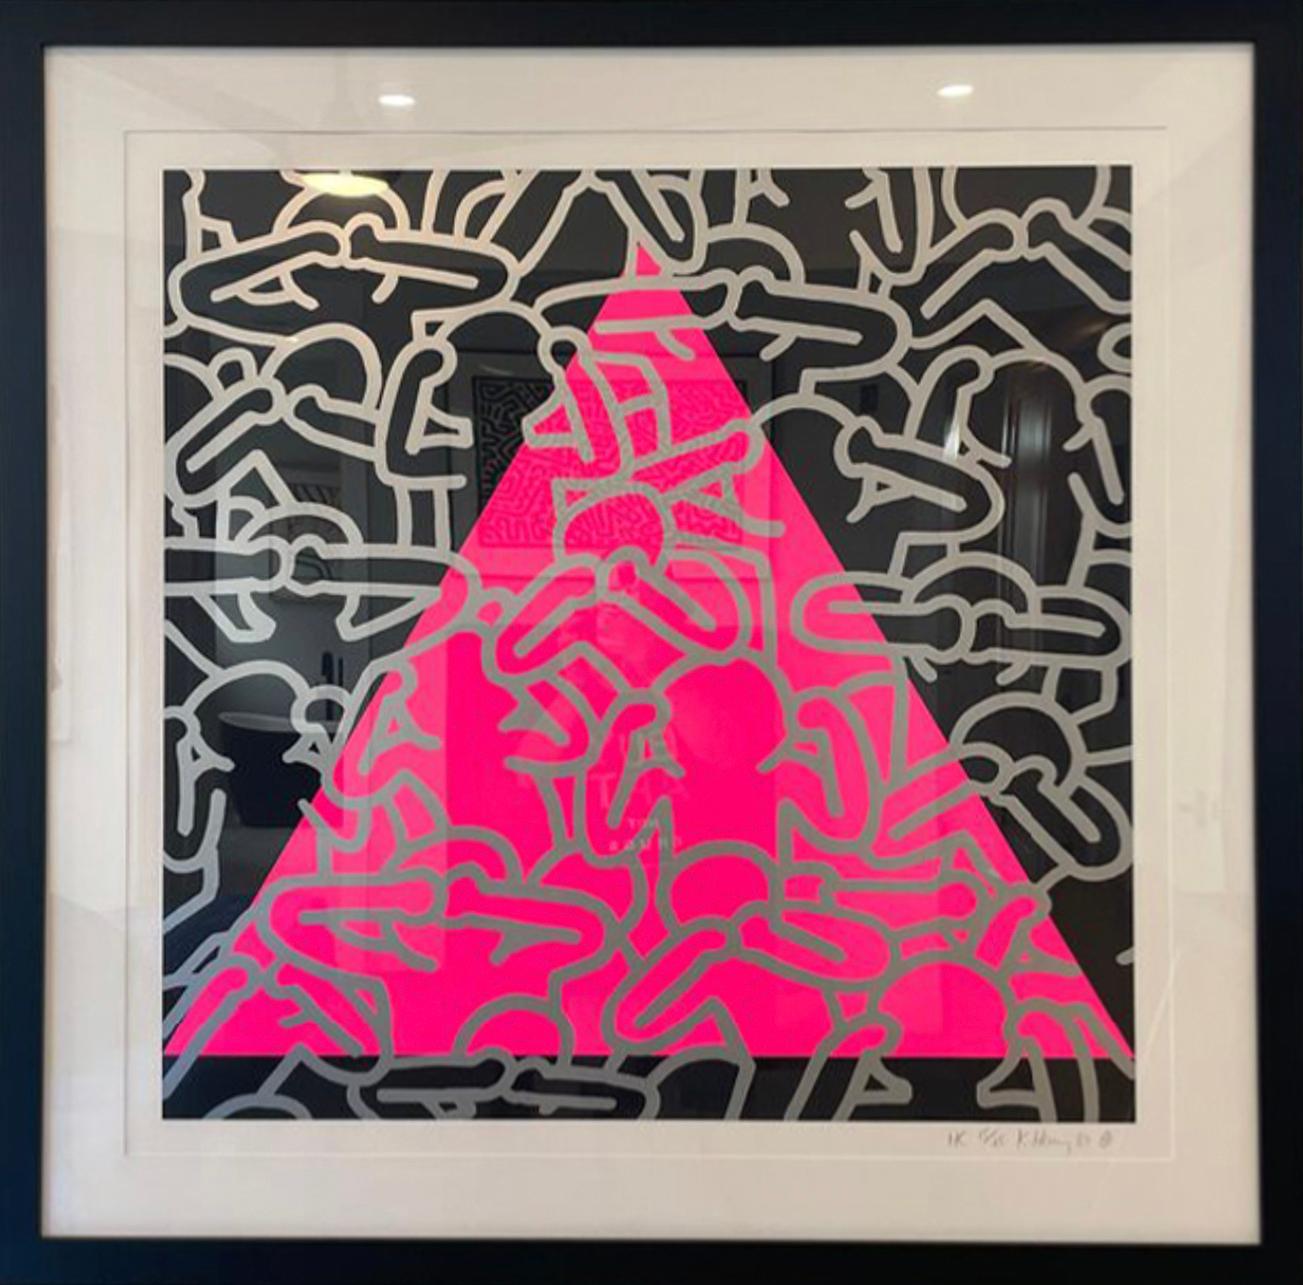 Silence = Death - Print by Keith Haring